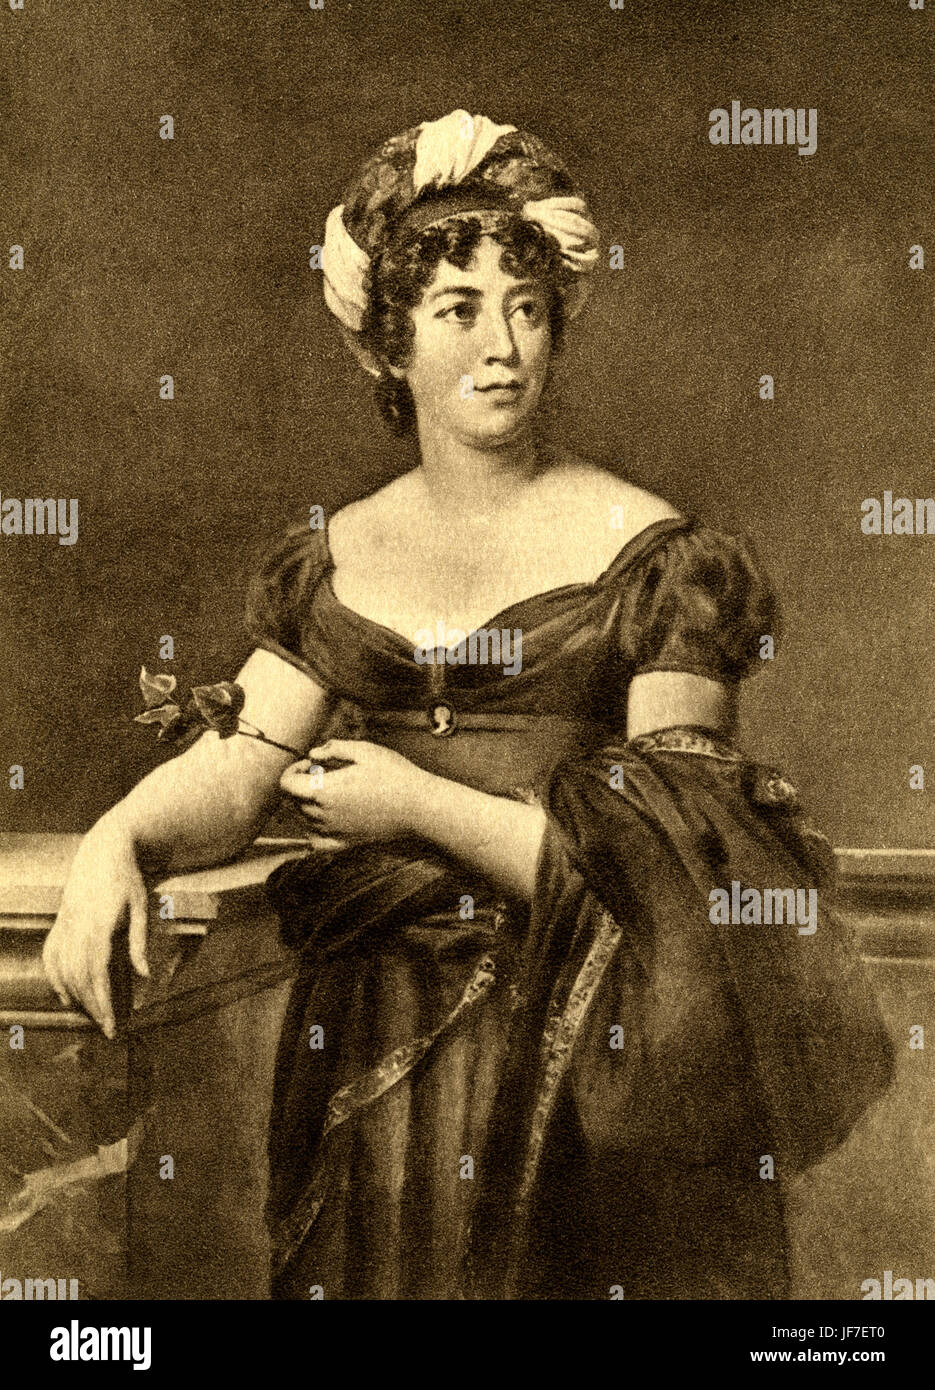 Madame de Staël (Baronne Anne Louise Germaine de Staël-Holstein), portrait. French-speaking Swiss author living in Paris and abroad, she influenced literary tastes in Europe at the turn of the 18th and 19th centuries. 22 April   1766 –  14 July  1817 Stock Photo